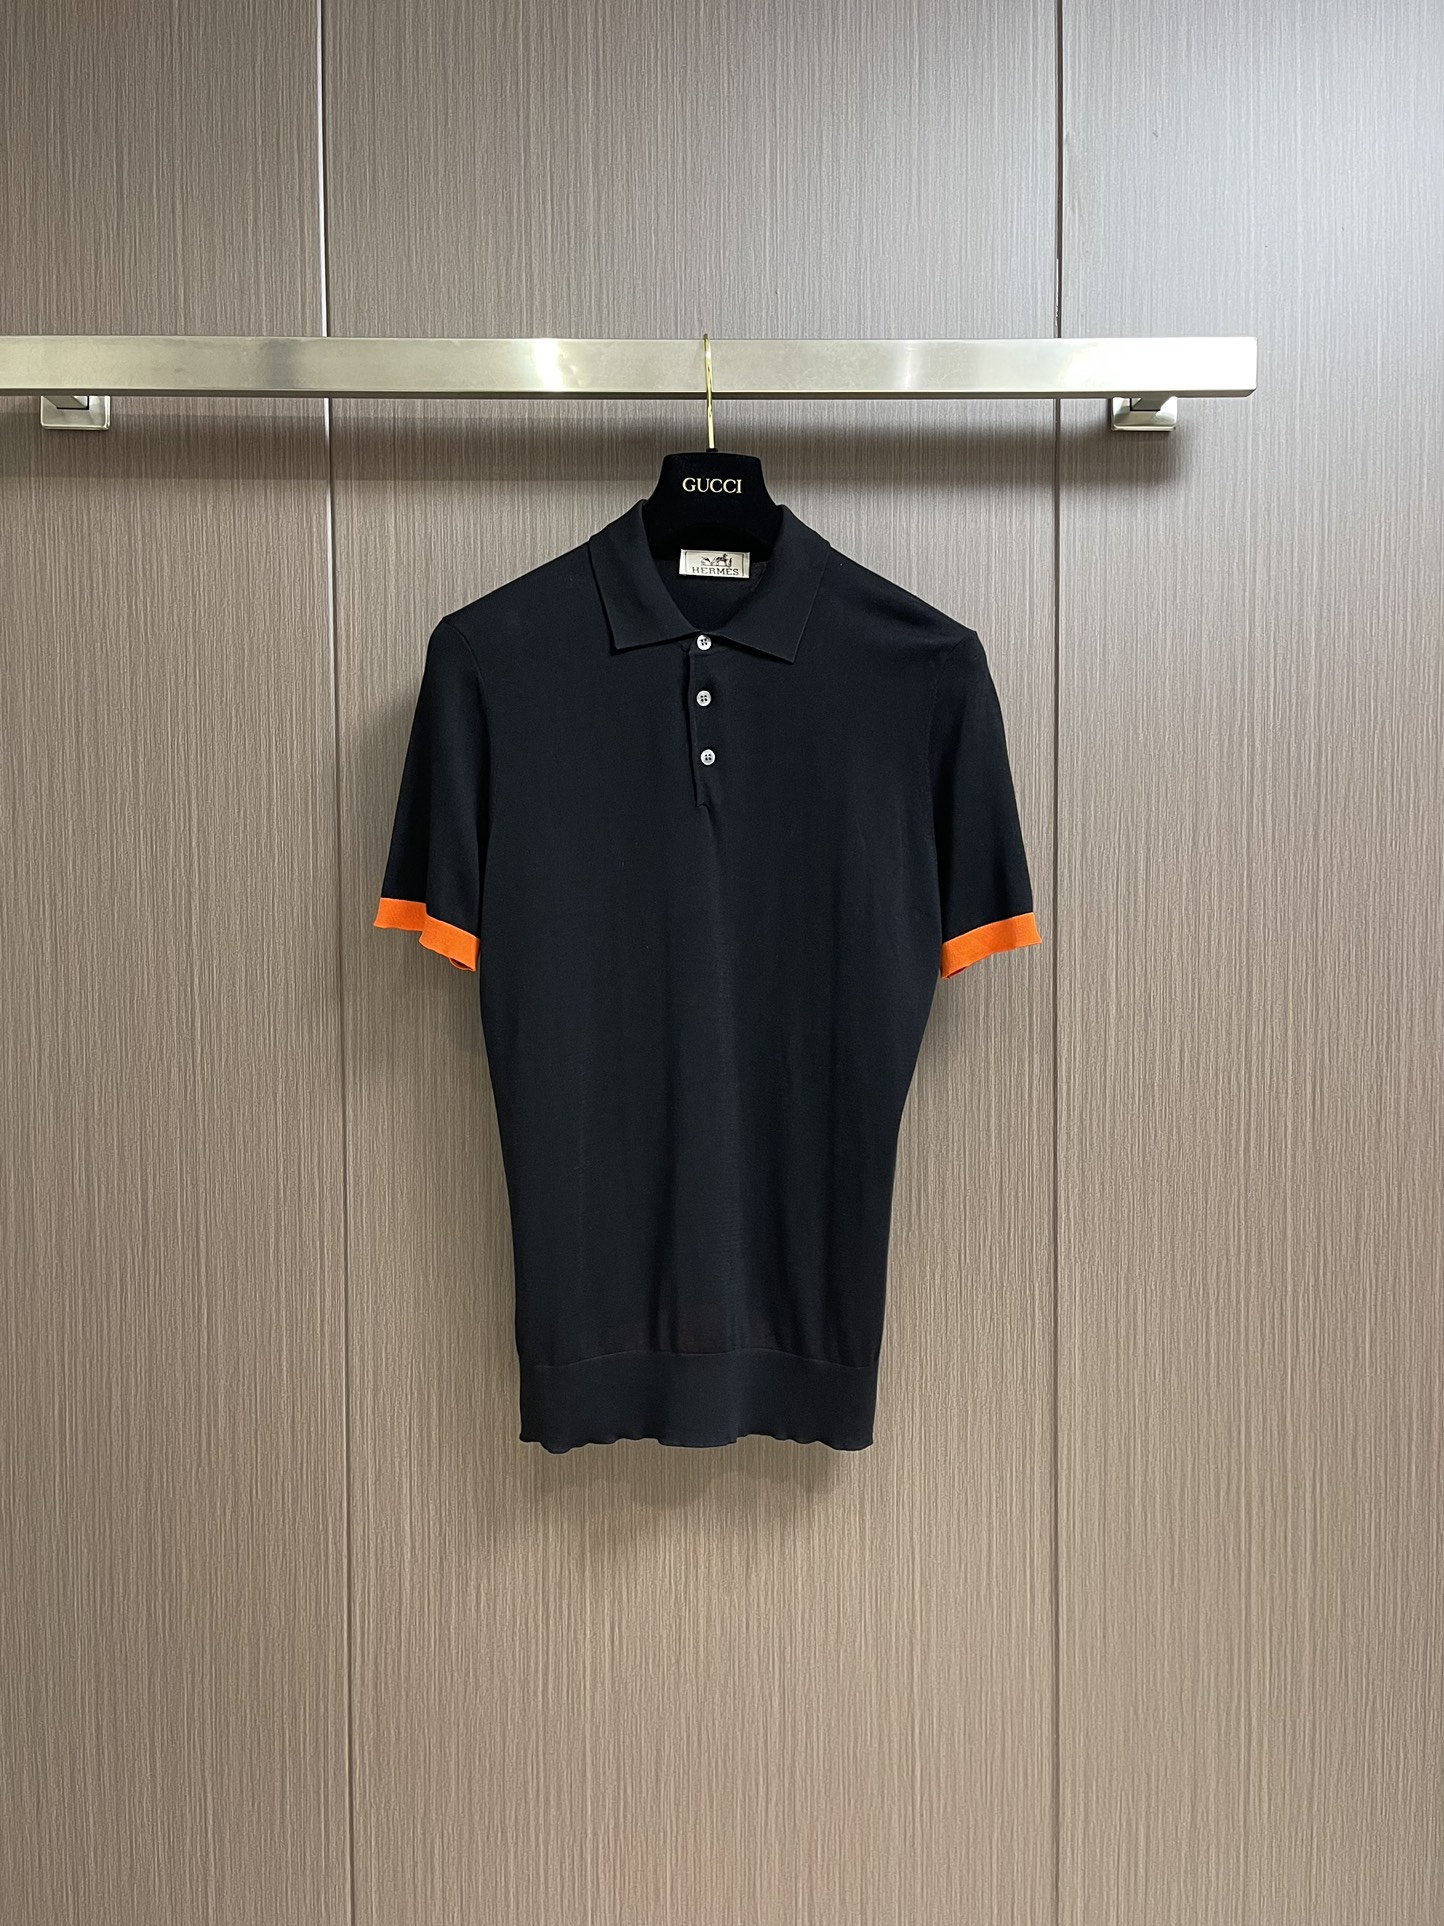 Hermes AAA+
 Clothing Polo Cotton Knitting Casual